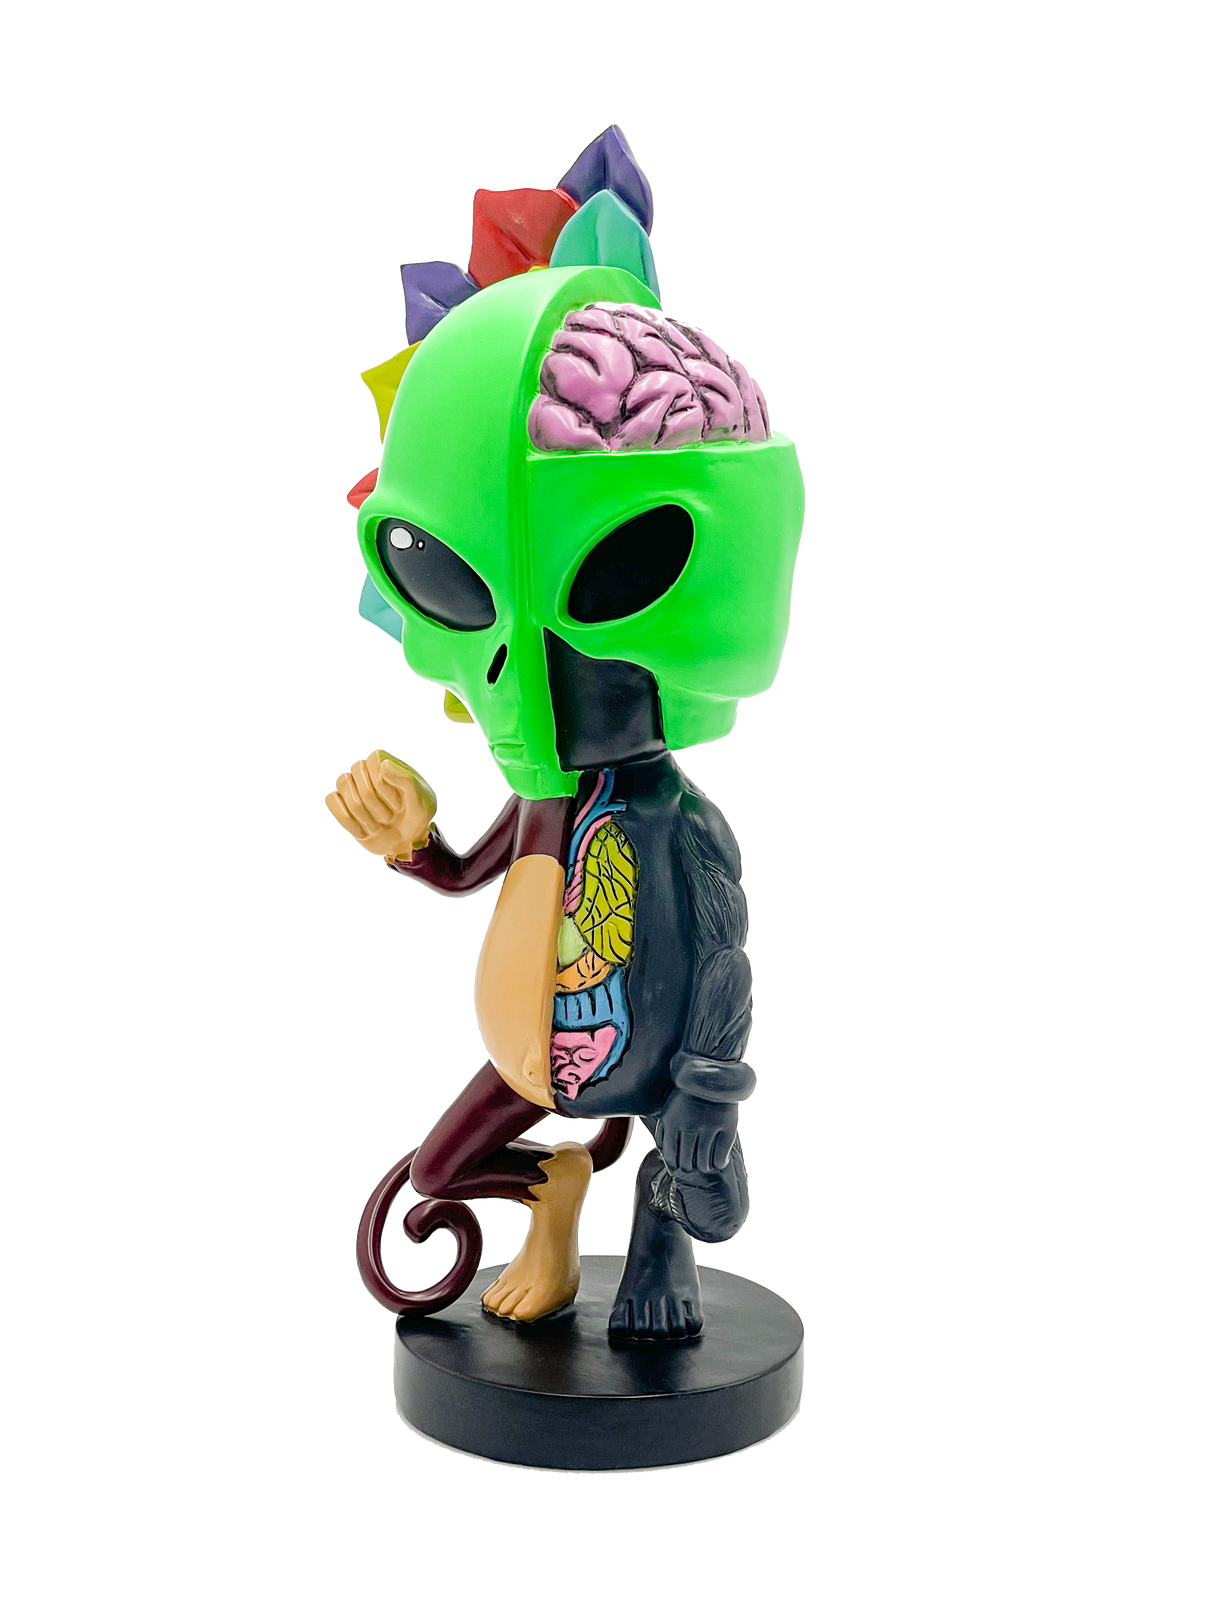 AFM Limited Edition 12" Skeletal Figure in vibrant colors, perfect for home decor and novelty gift.